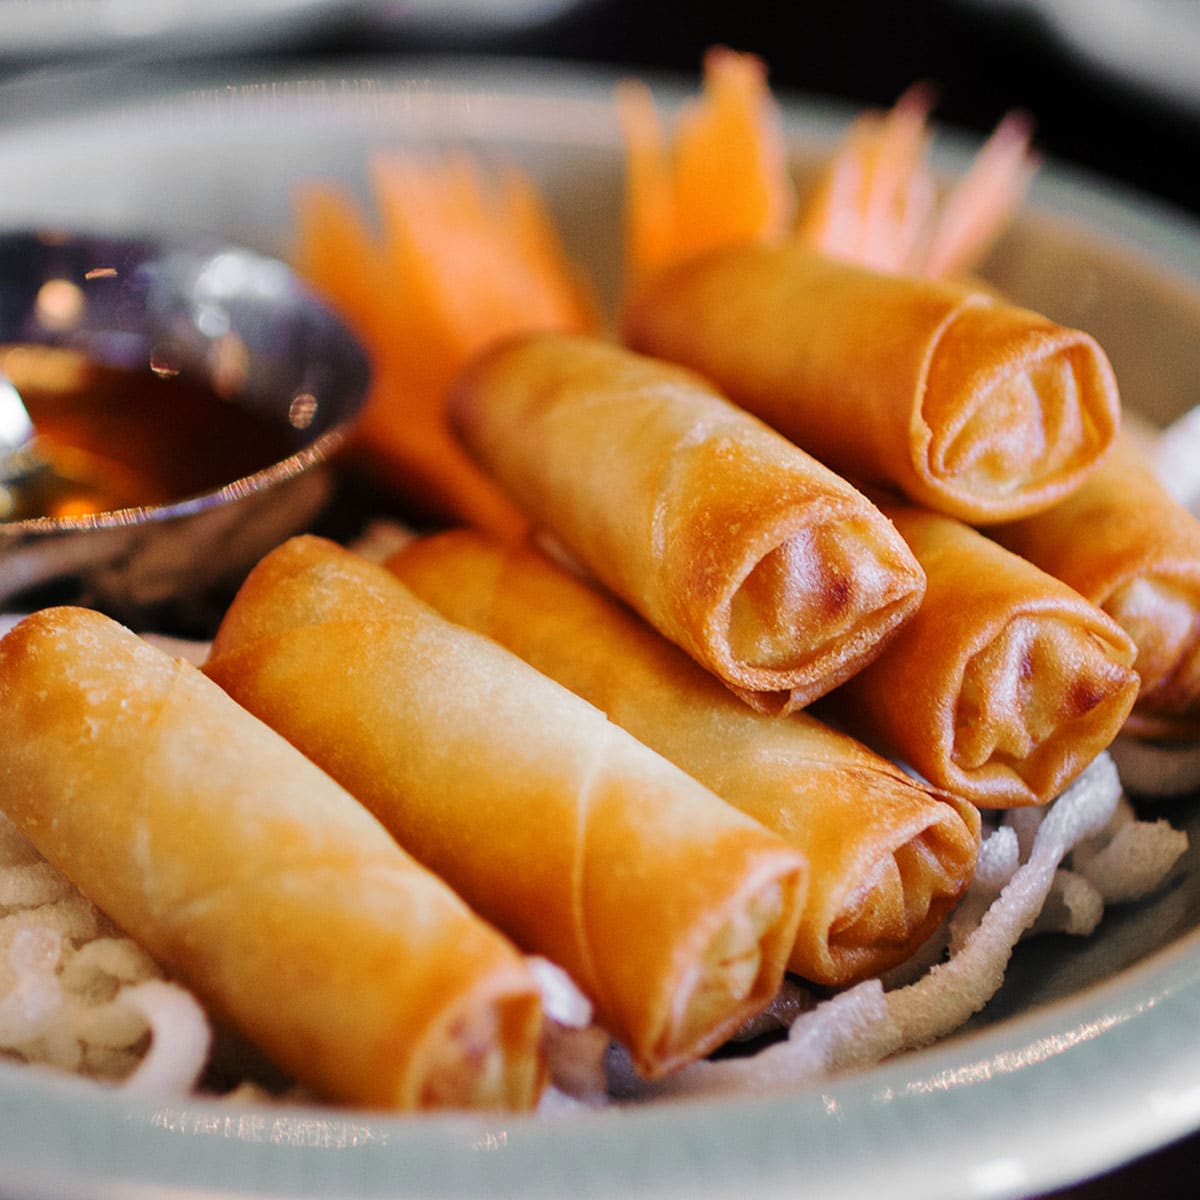 When uncooked, lumpia can be packed in tightly sealed freezer bags and frozen for up to 3 months. When the time comes to cook them, you don't need to defrost them first